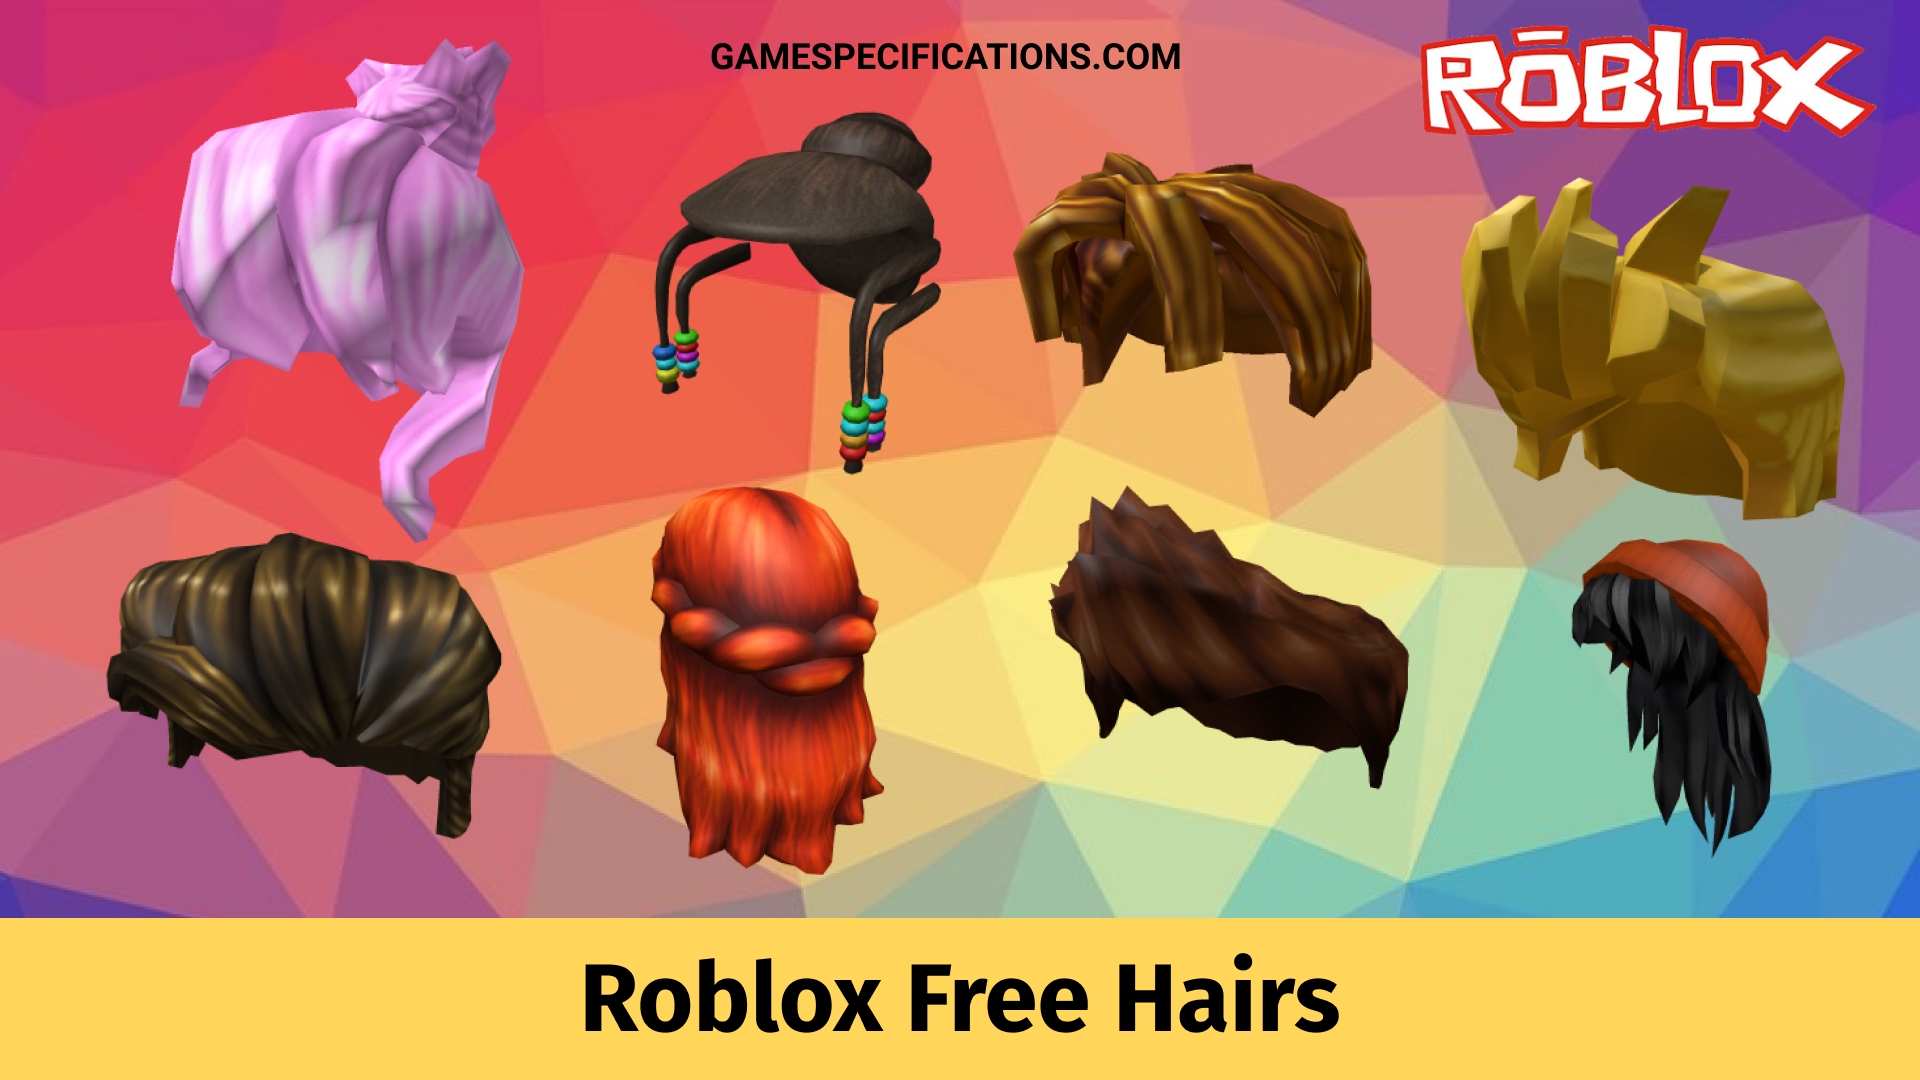 Roblox Free Hairs For Awesome Aesthetics - Game Specifications